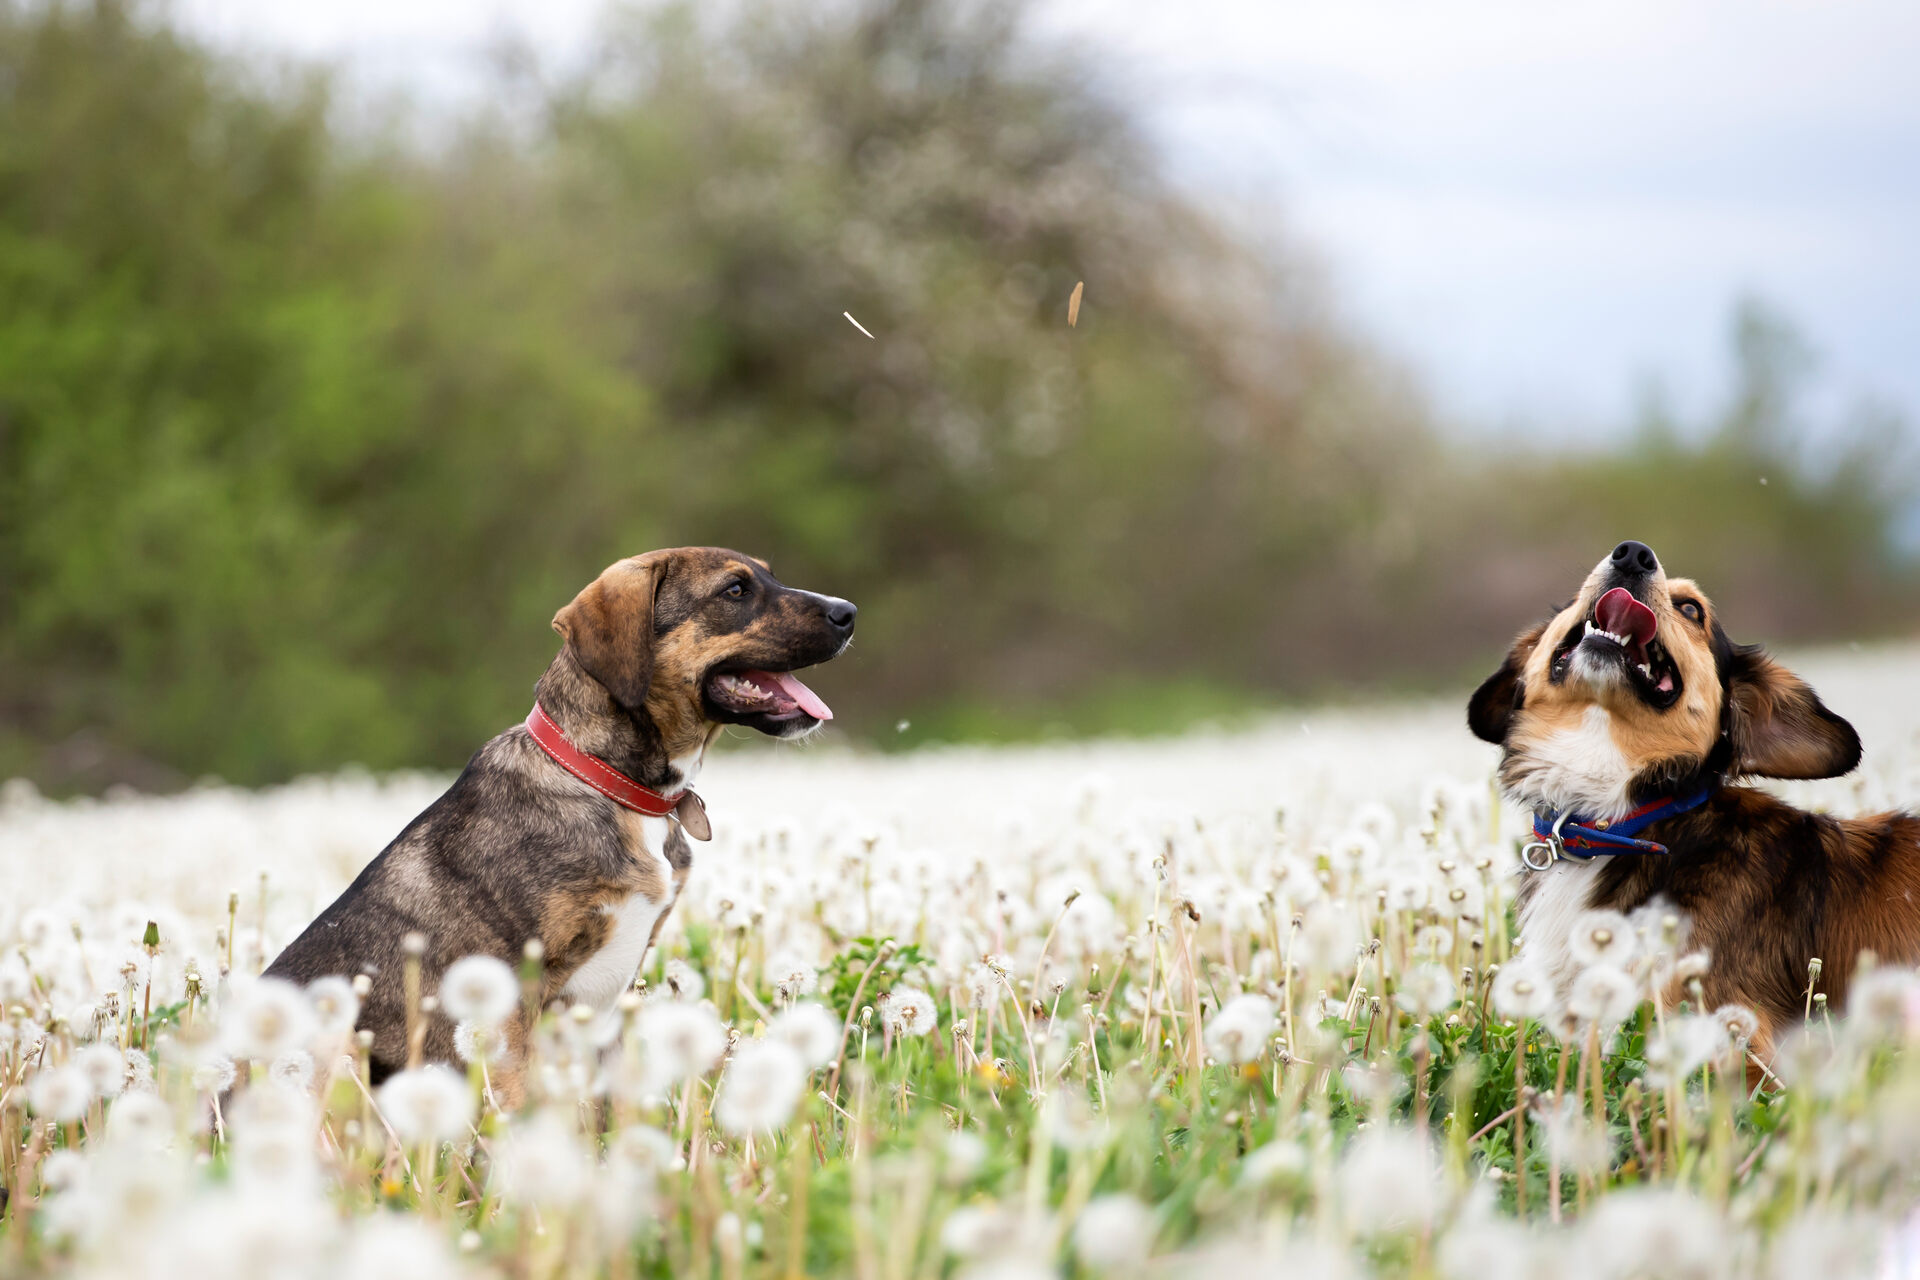 Two dogs playing in a field full of dandelions